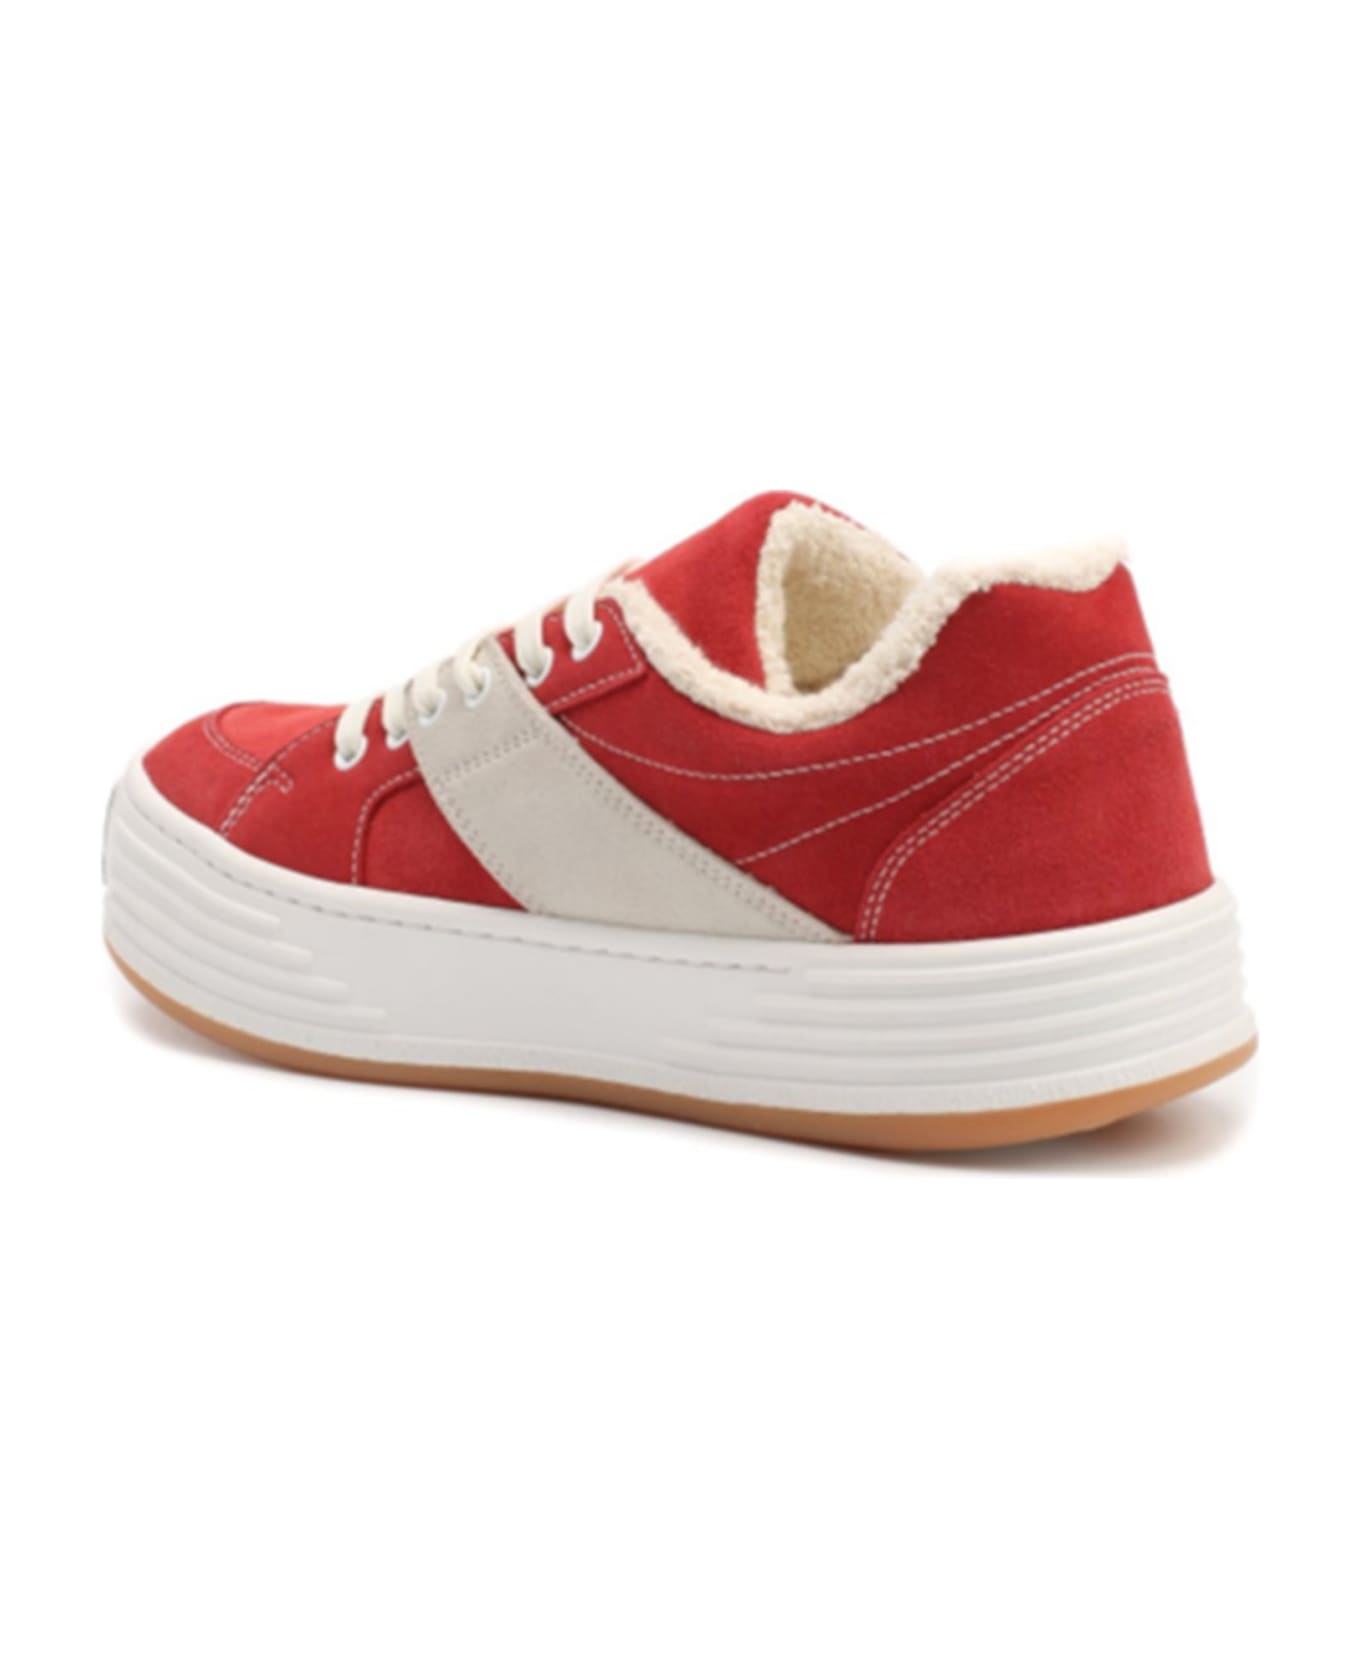 Palm Angels Suede Logo Sneakers - Red